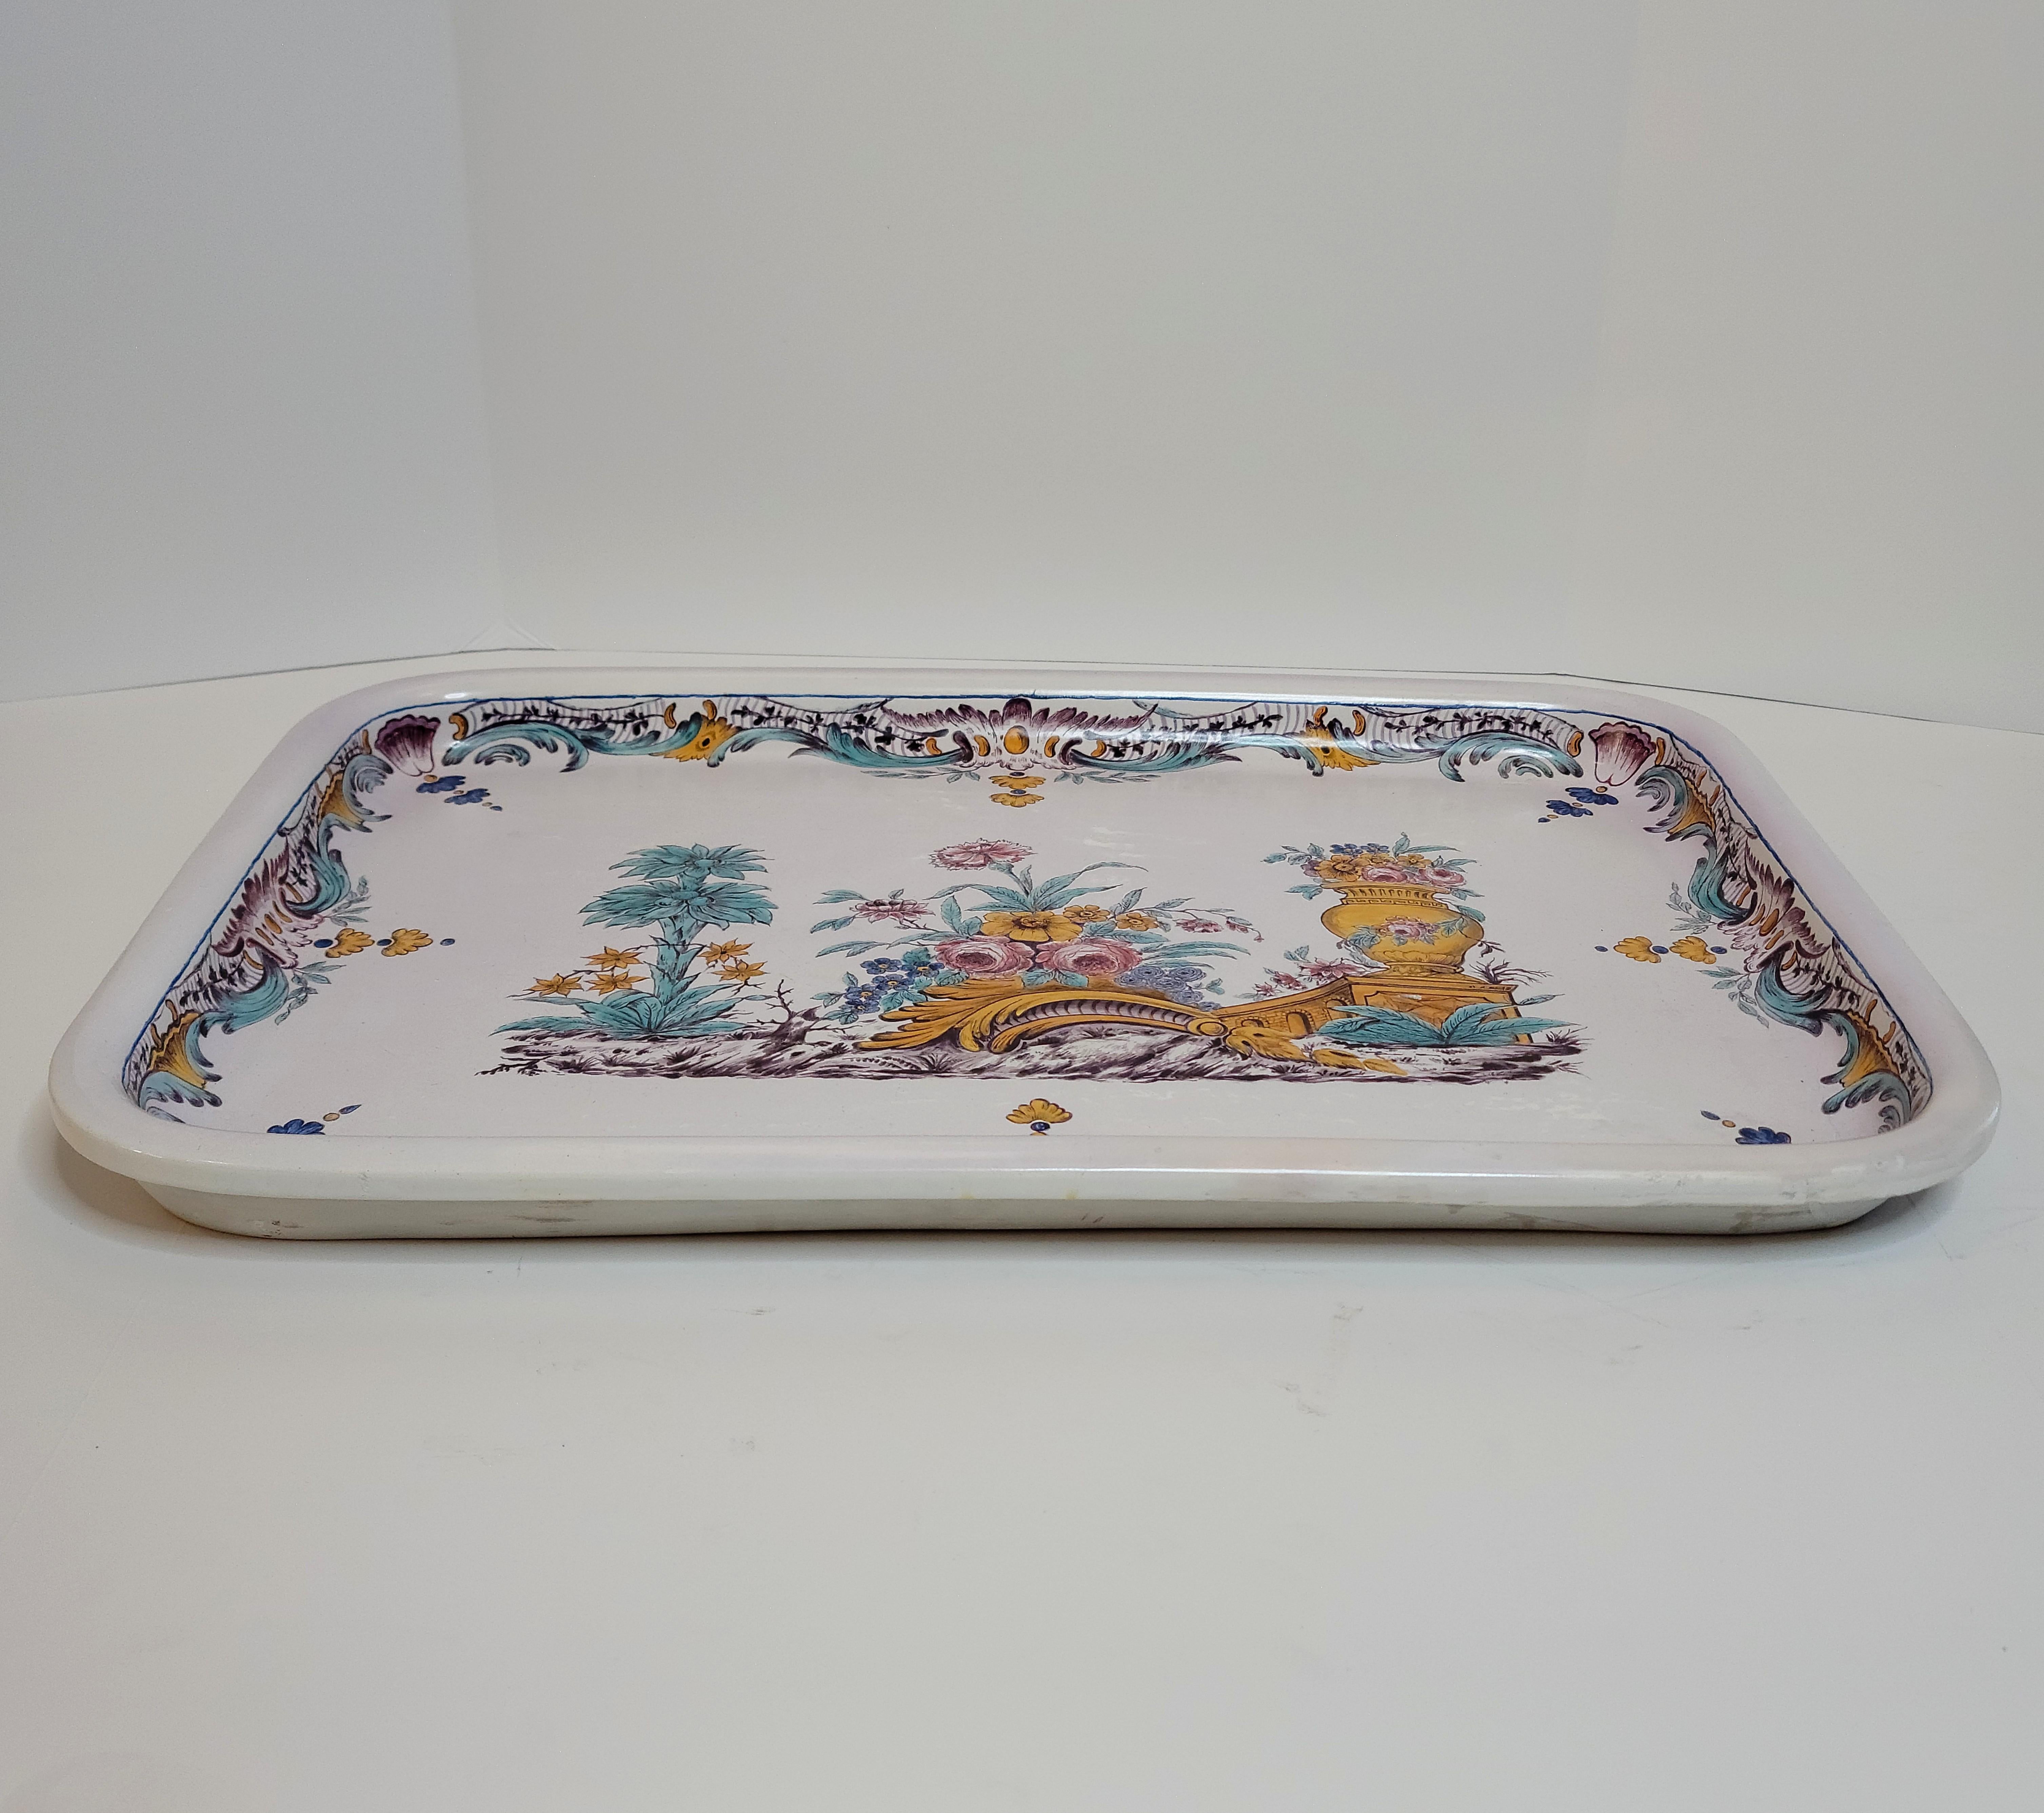 Large Antique Swedish Rörstrand Porcelain Signed Hand Painted Decorative Tray For Sale 1